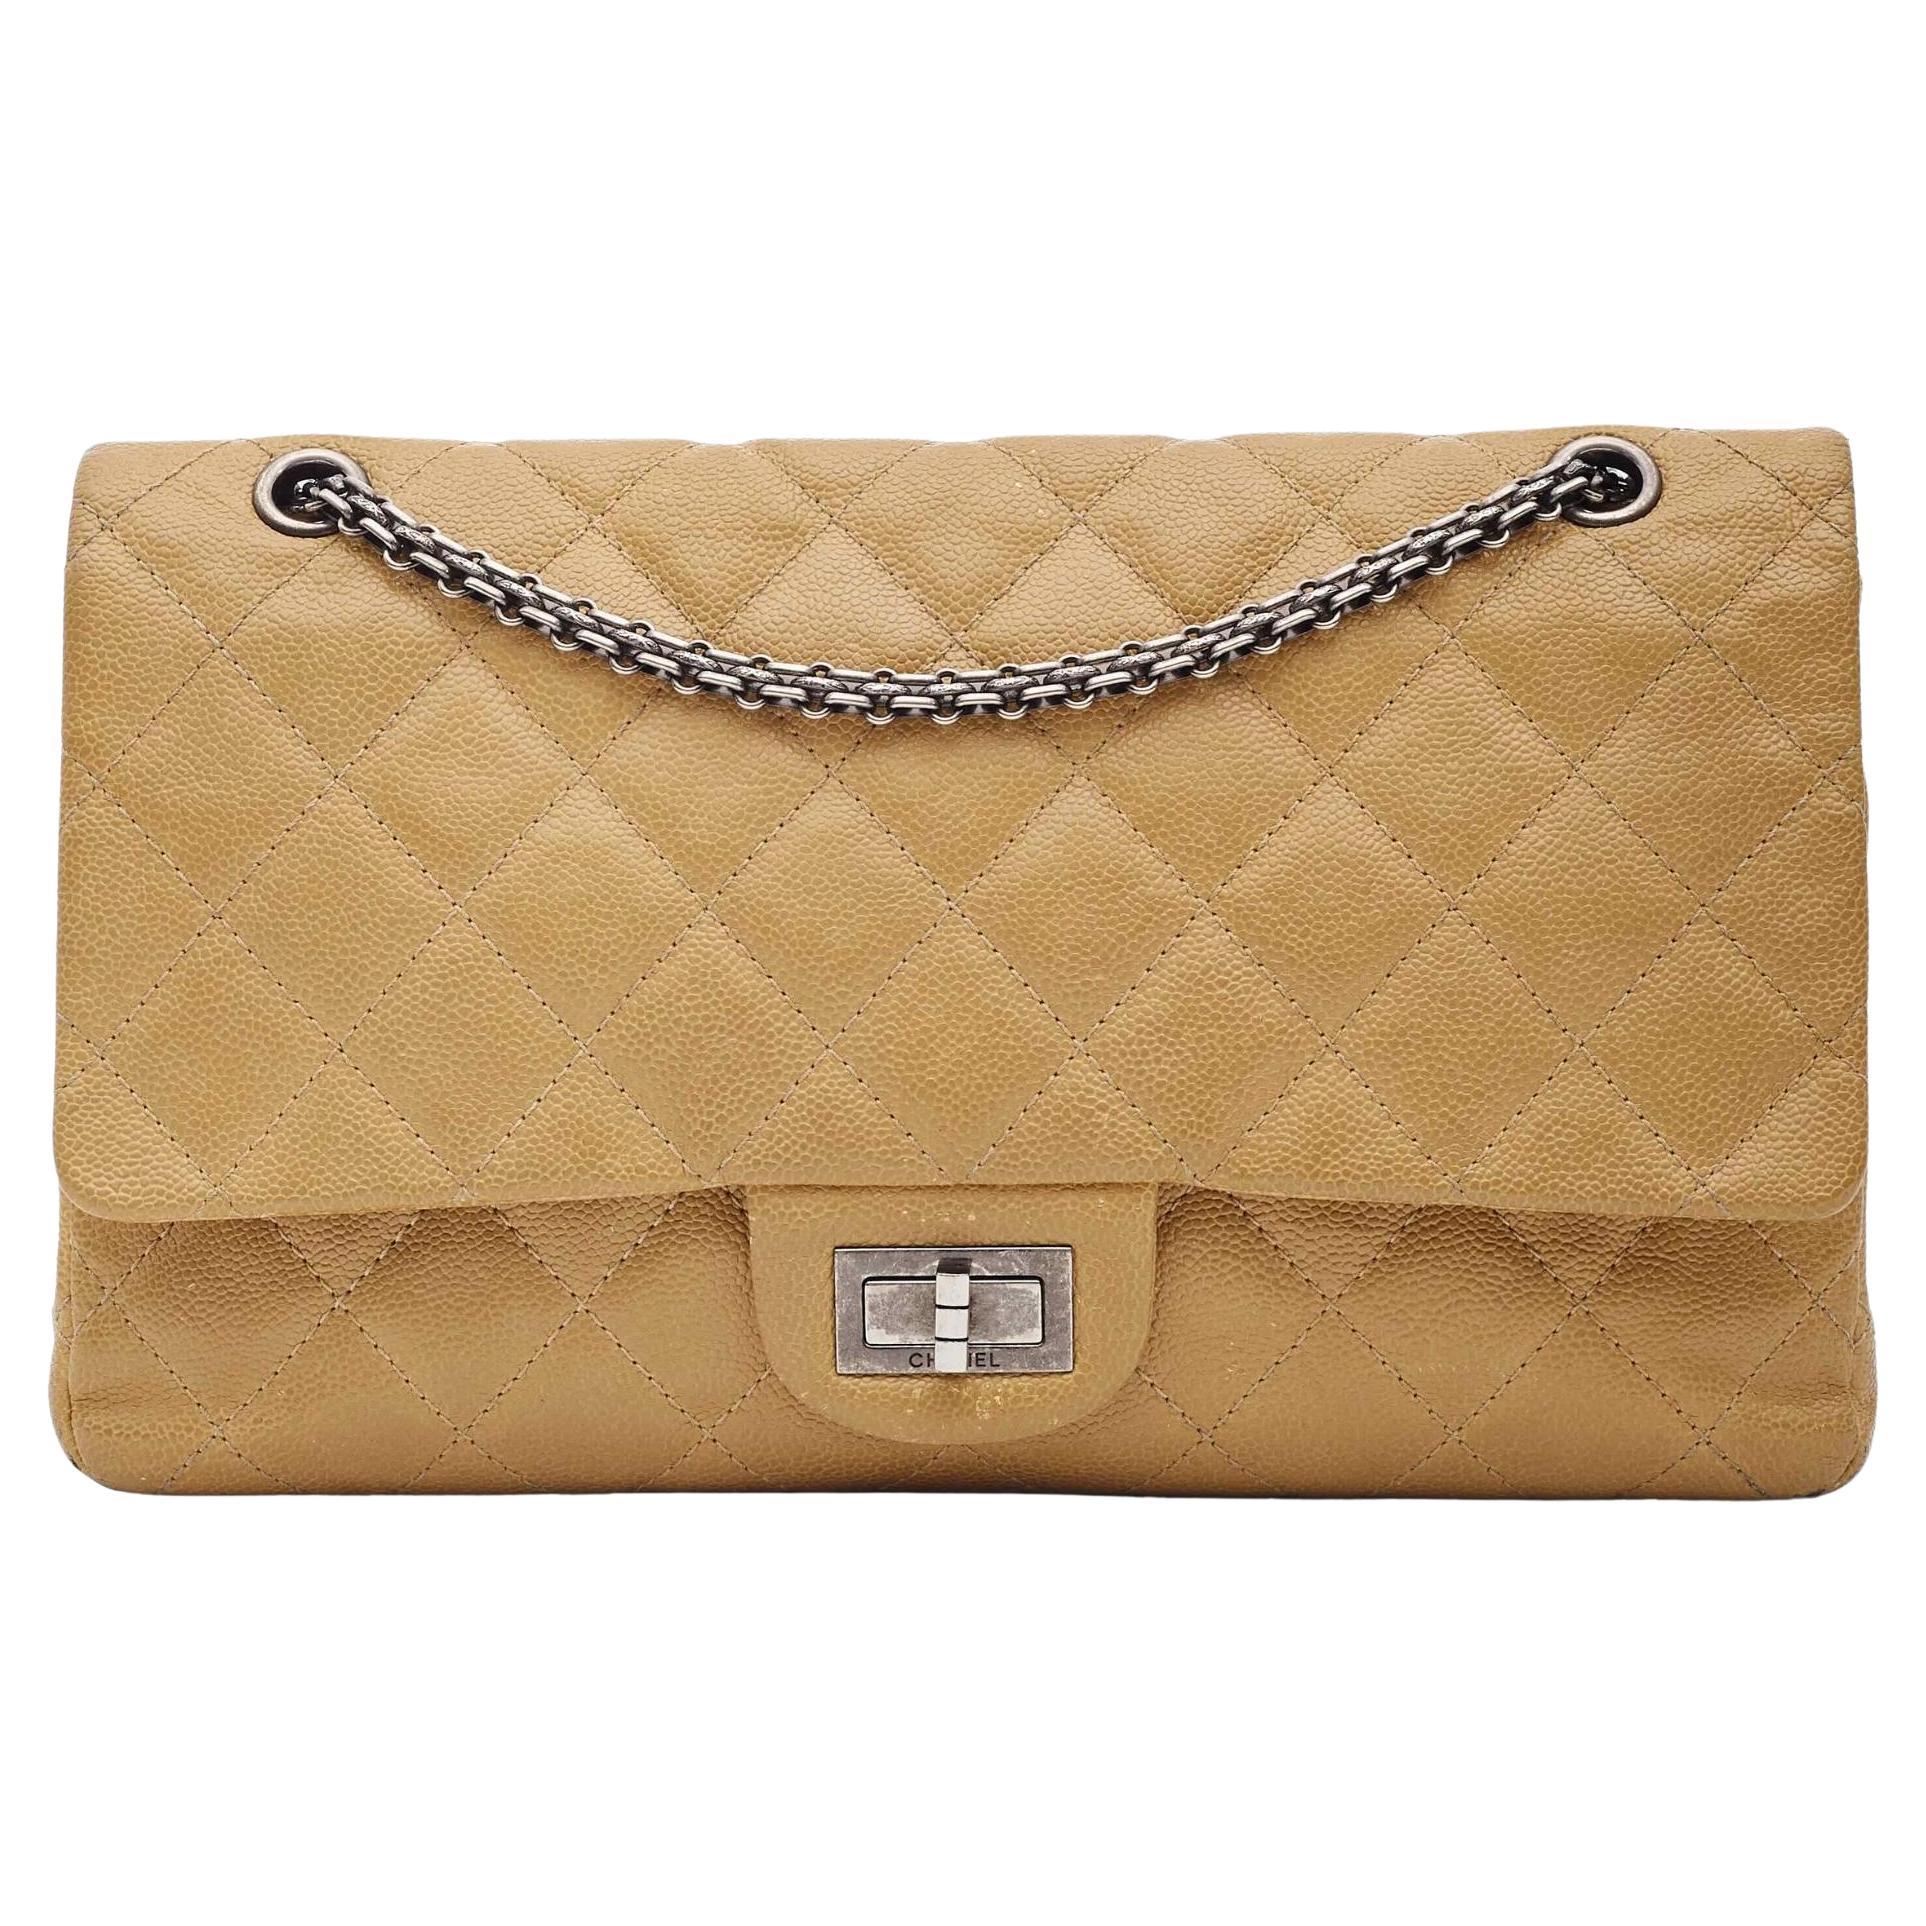 Chanel Caviar Leather 2.55 Reissue Maxi 227 Double Flap Bag For Sale